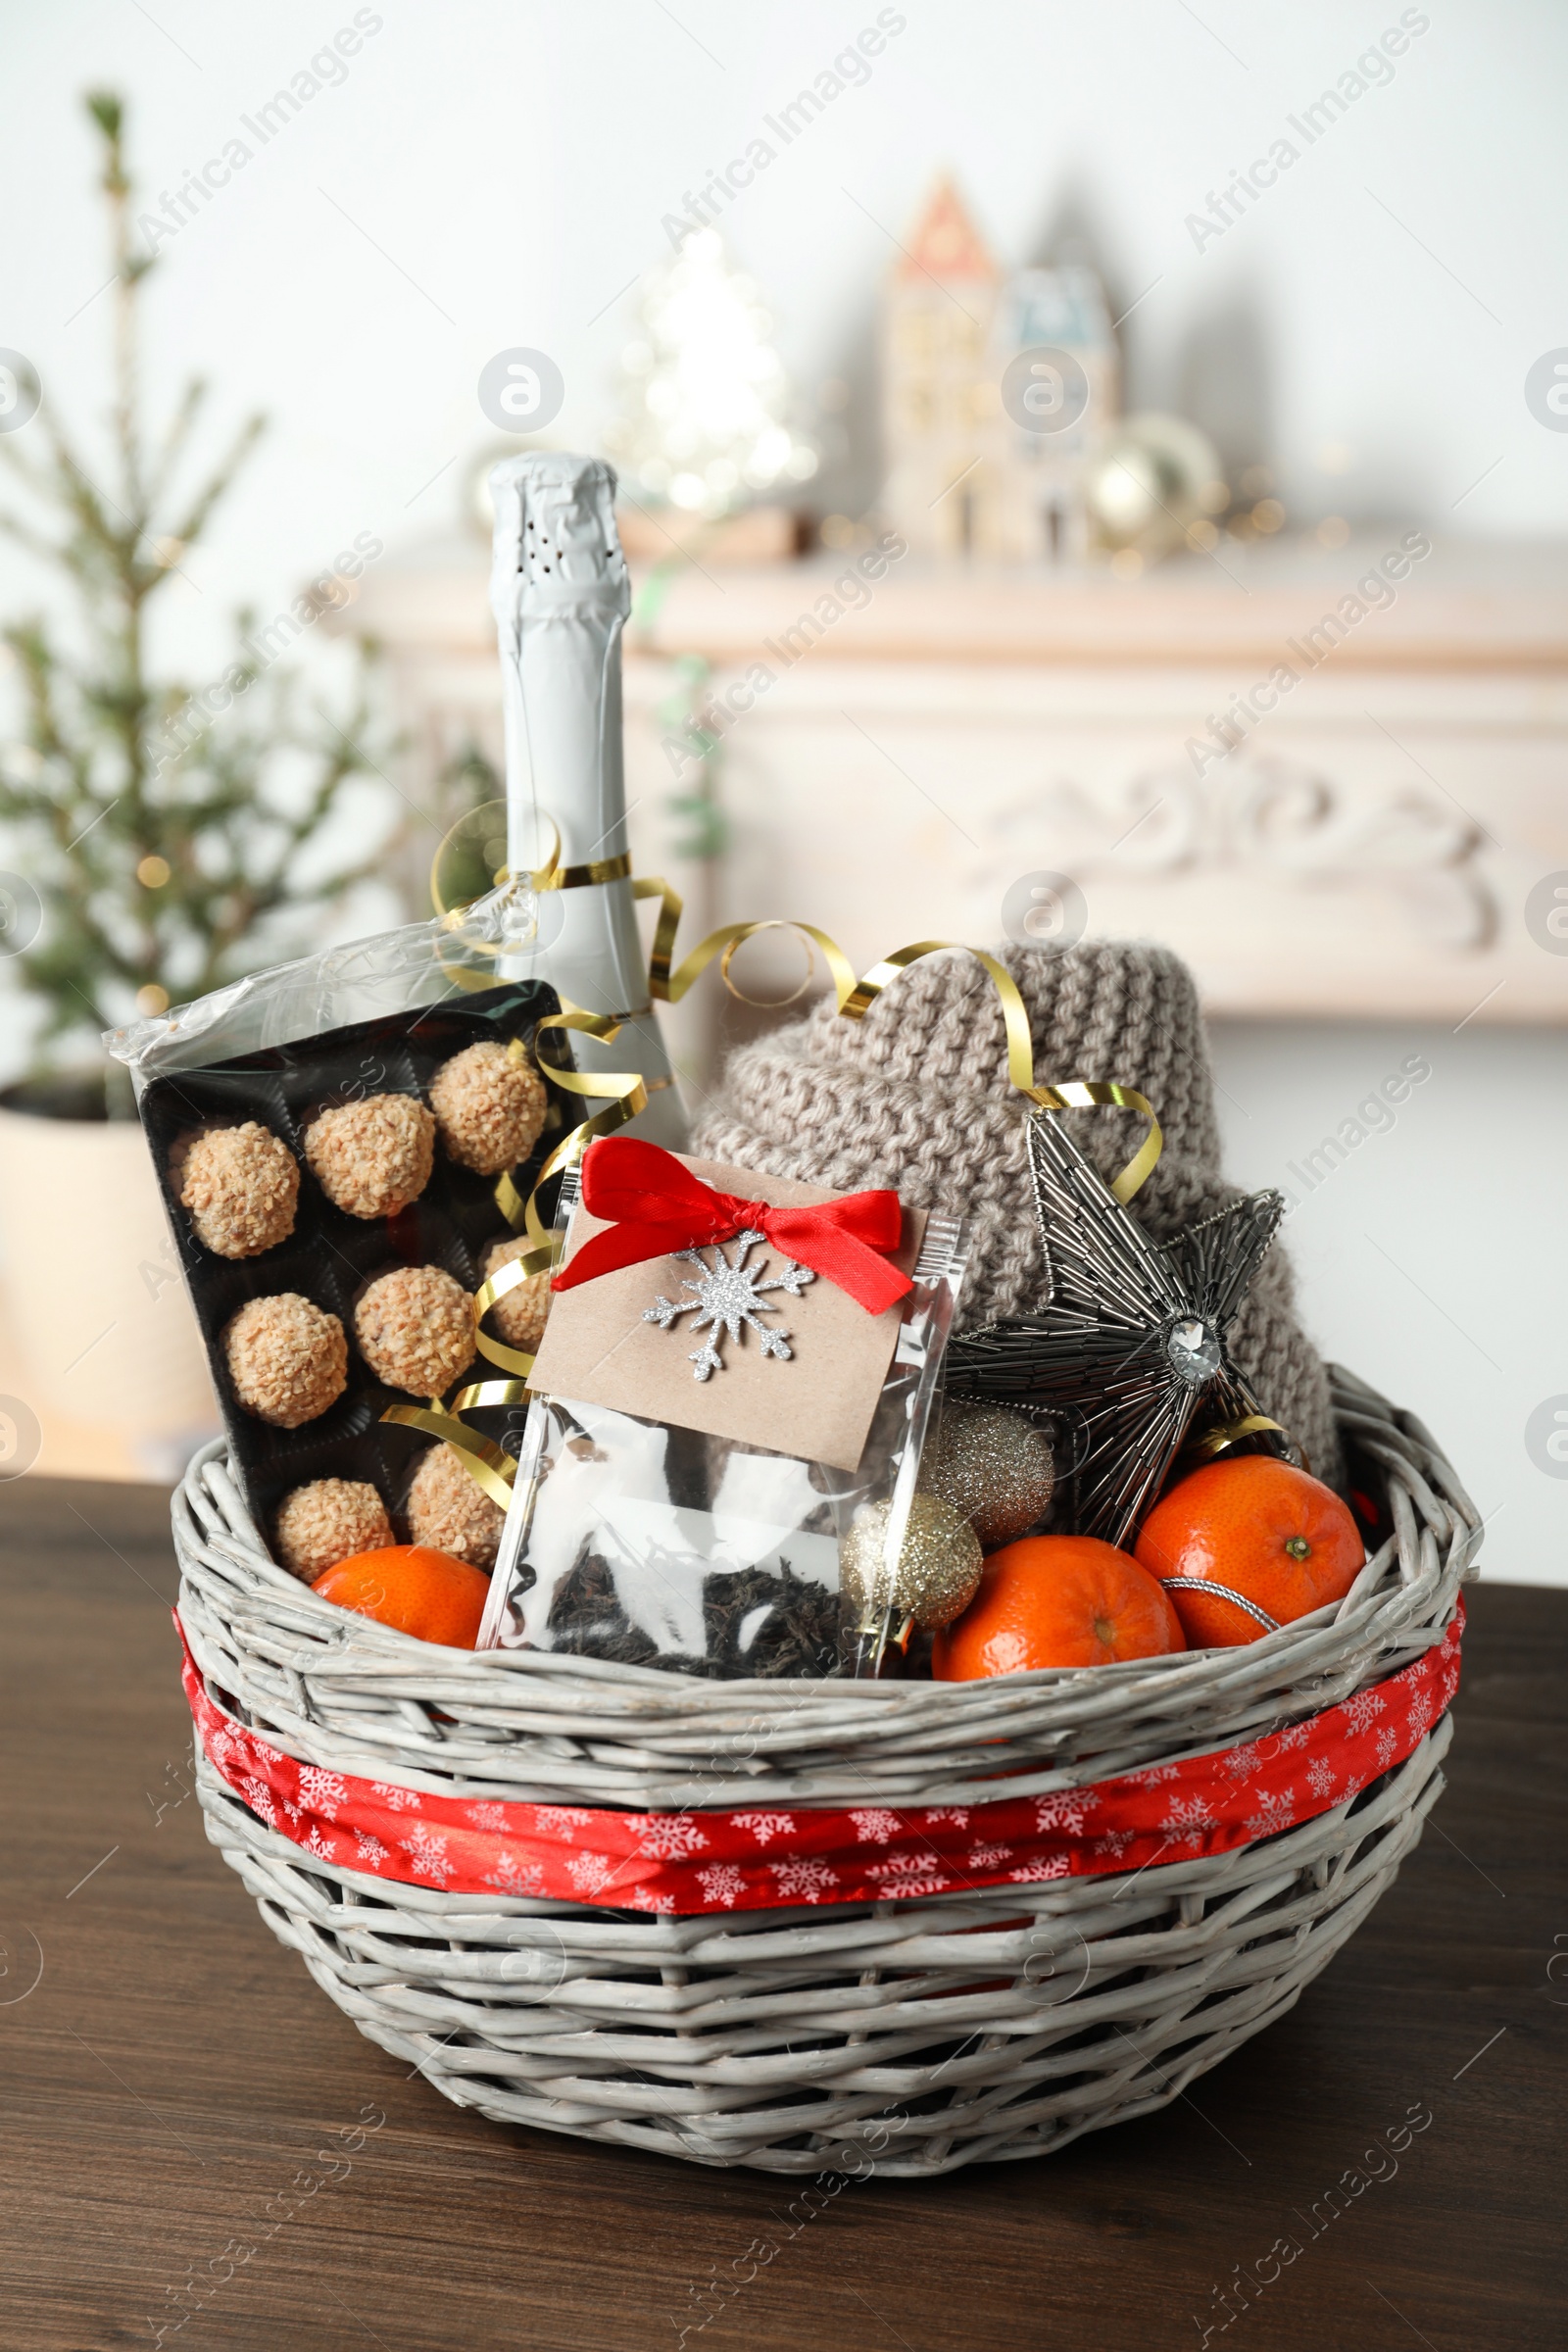 Photo of Wicker basket with Christmas gift set on wooden table